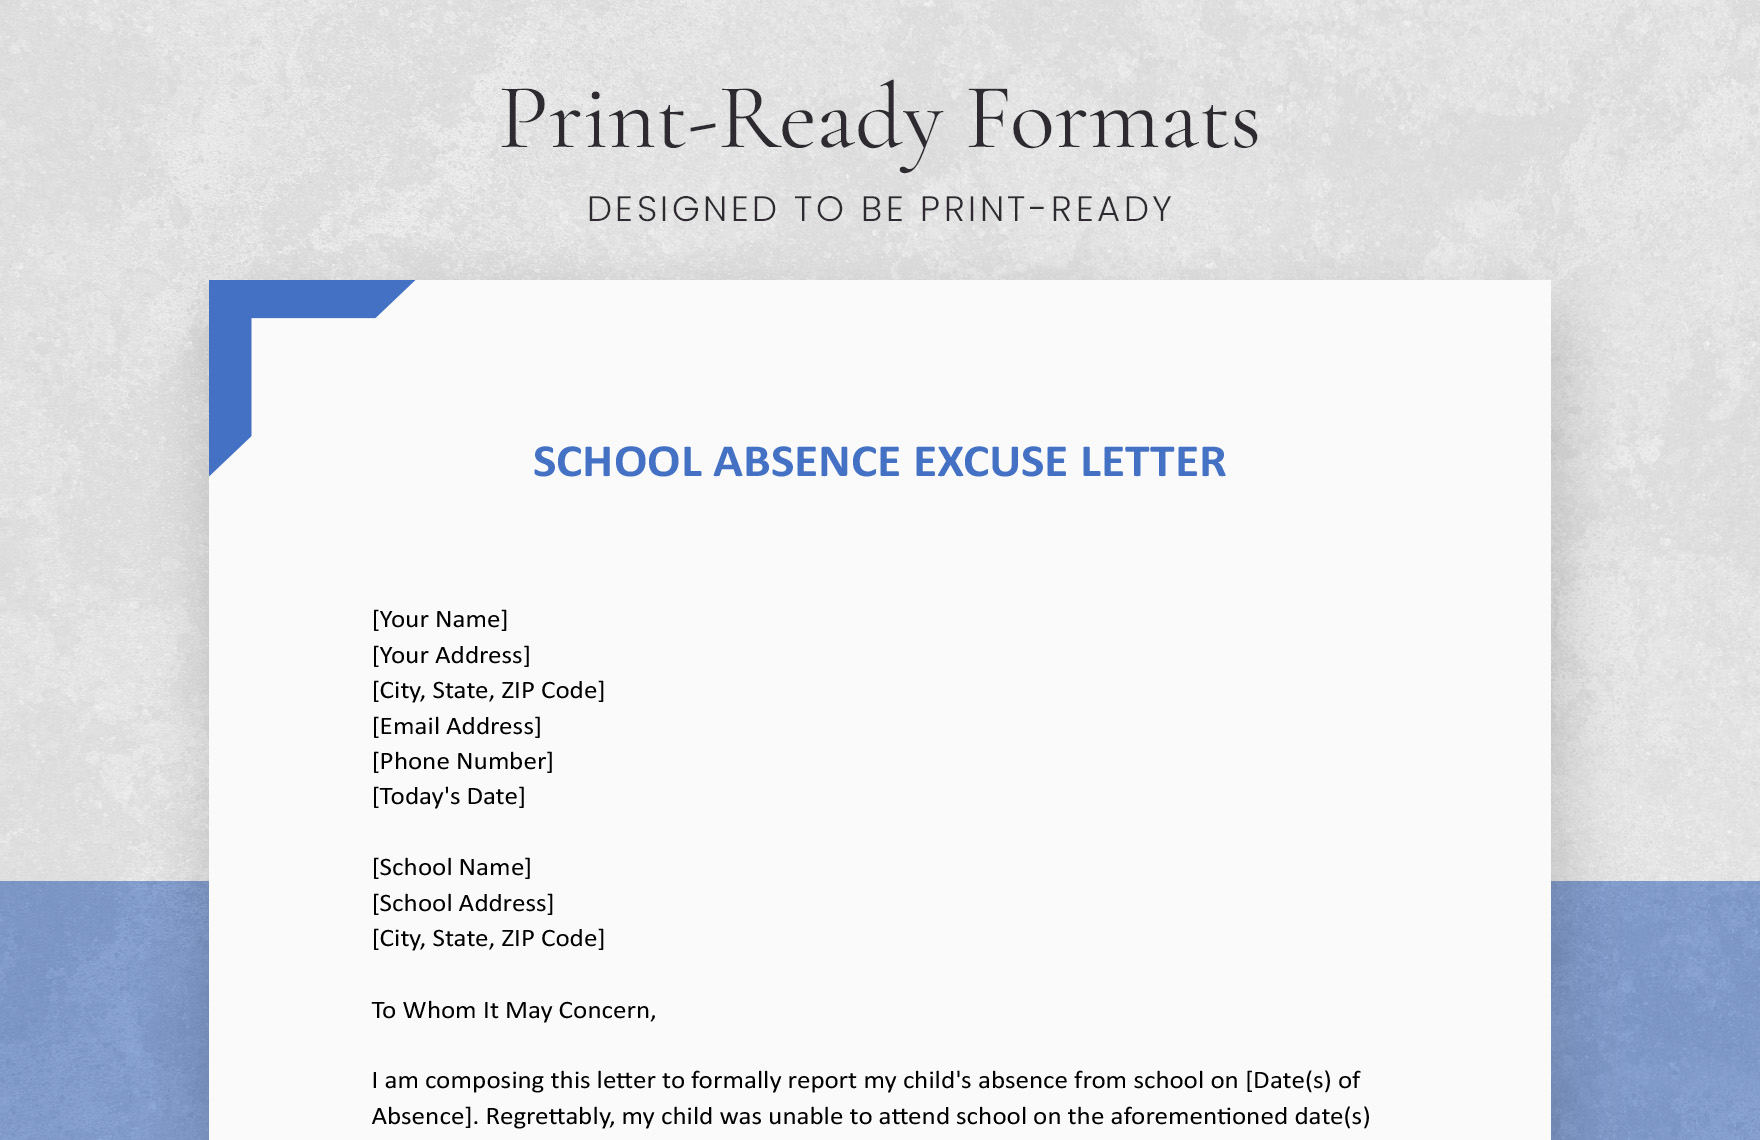 School Absence Excuse Letter